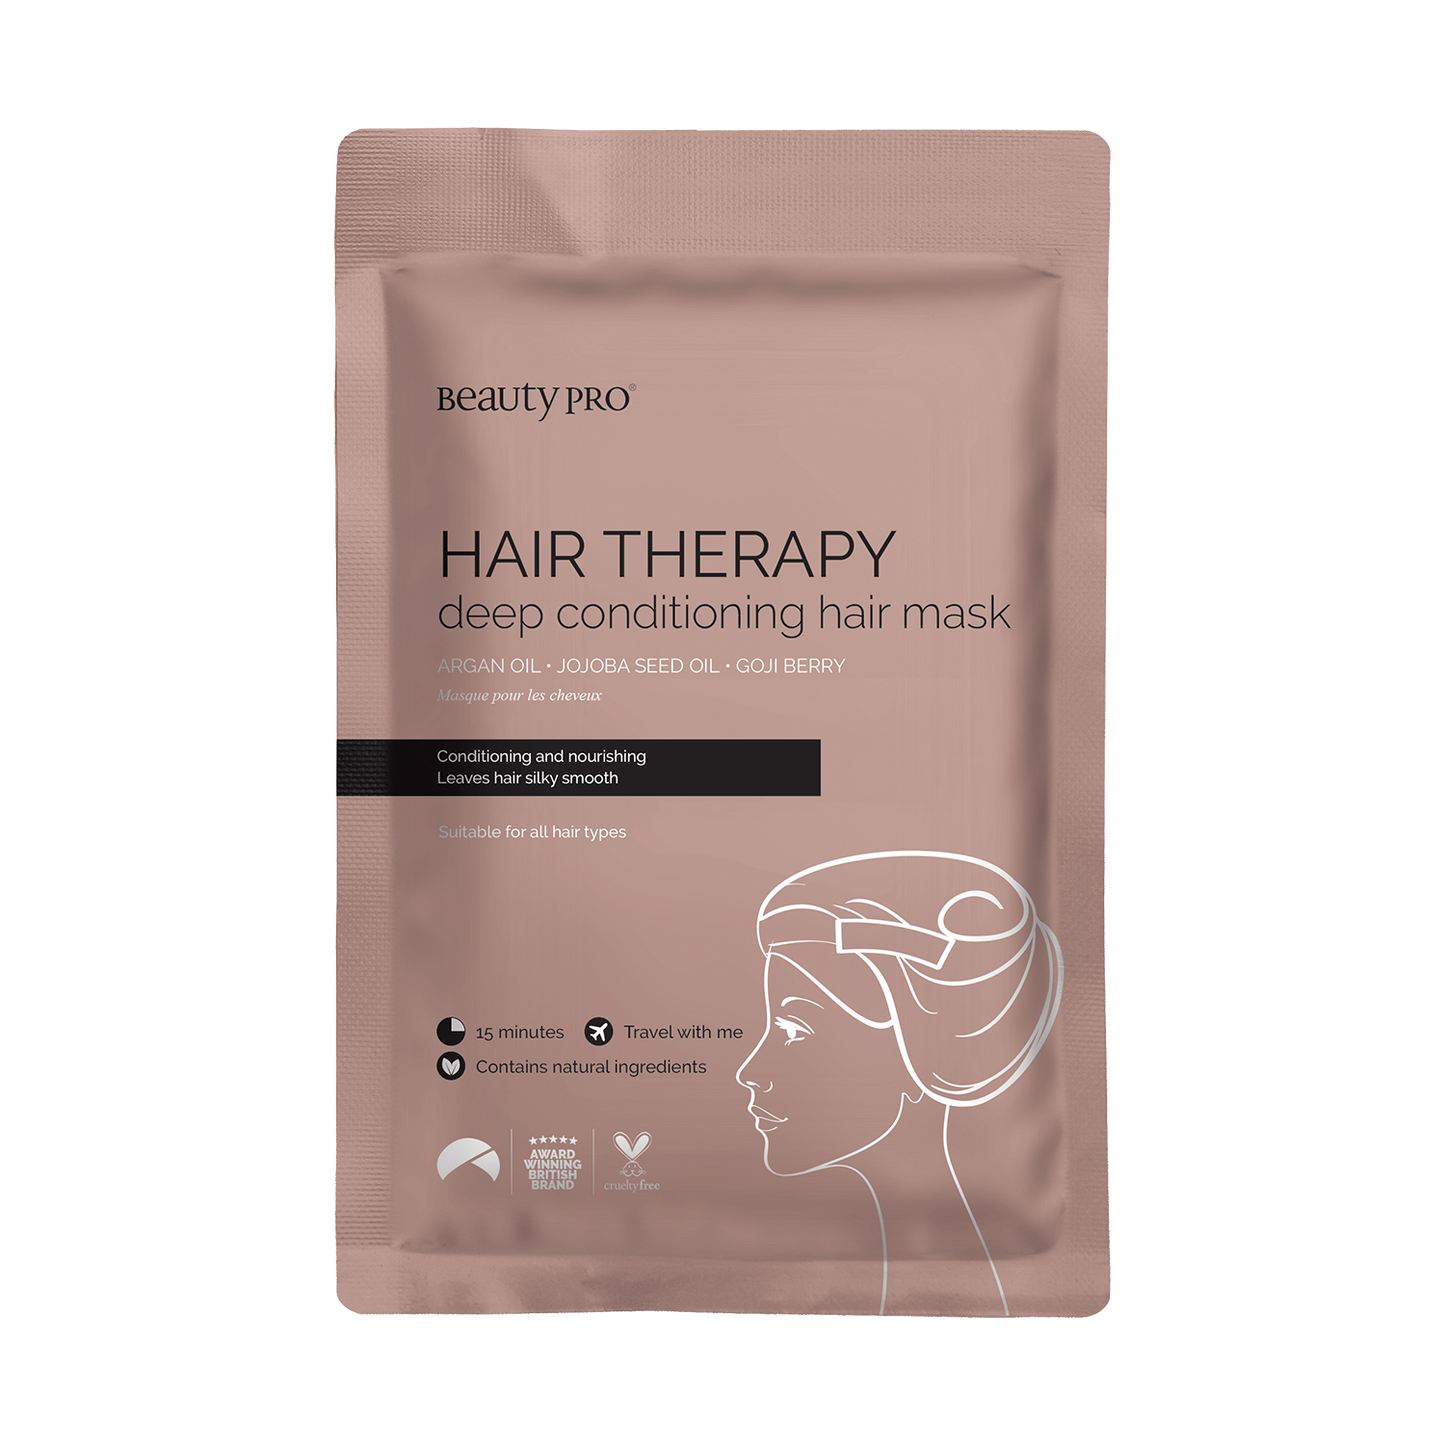 BeautyPro HAIR THERAPY Deep Conditioning Hair Mask with Argan Oil